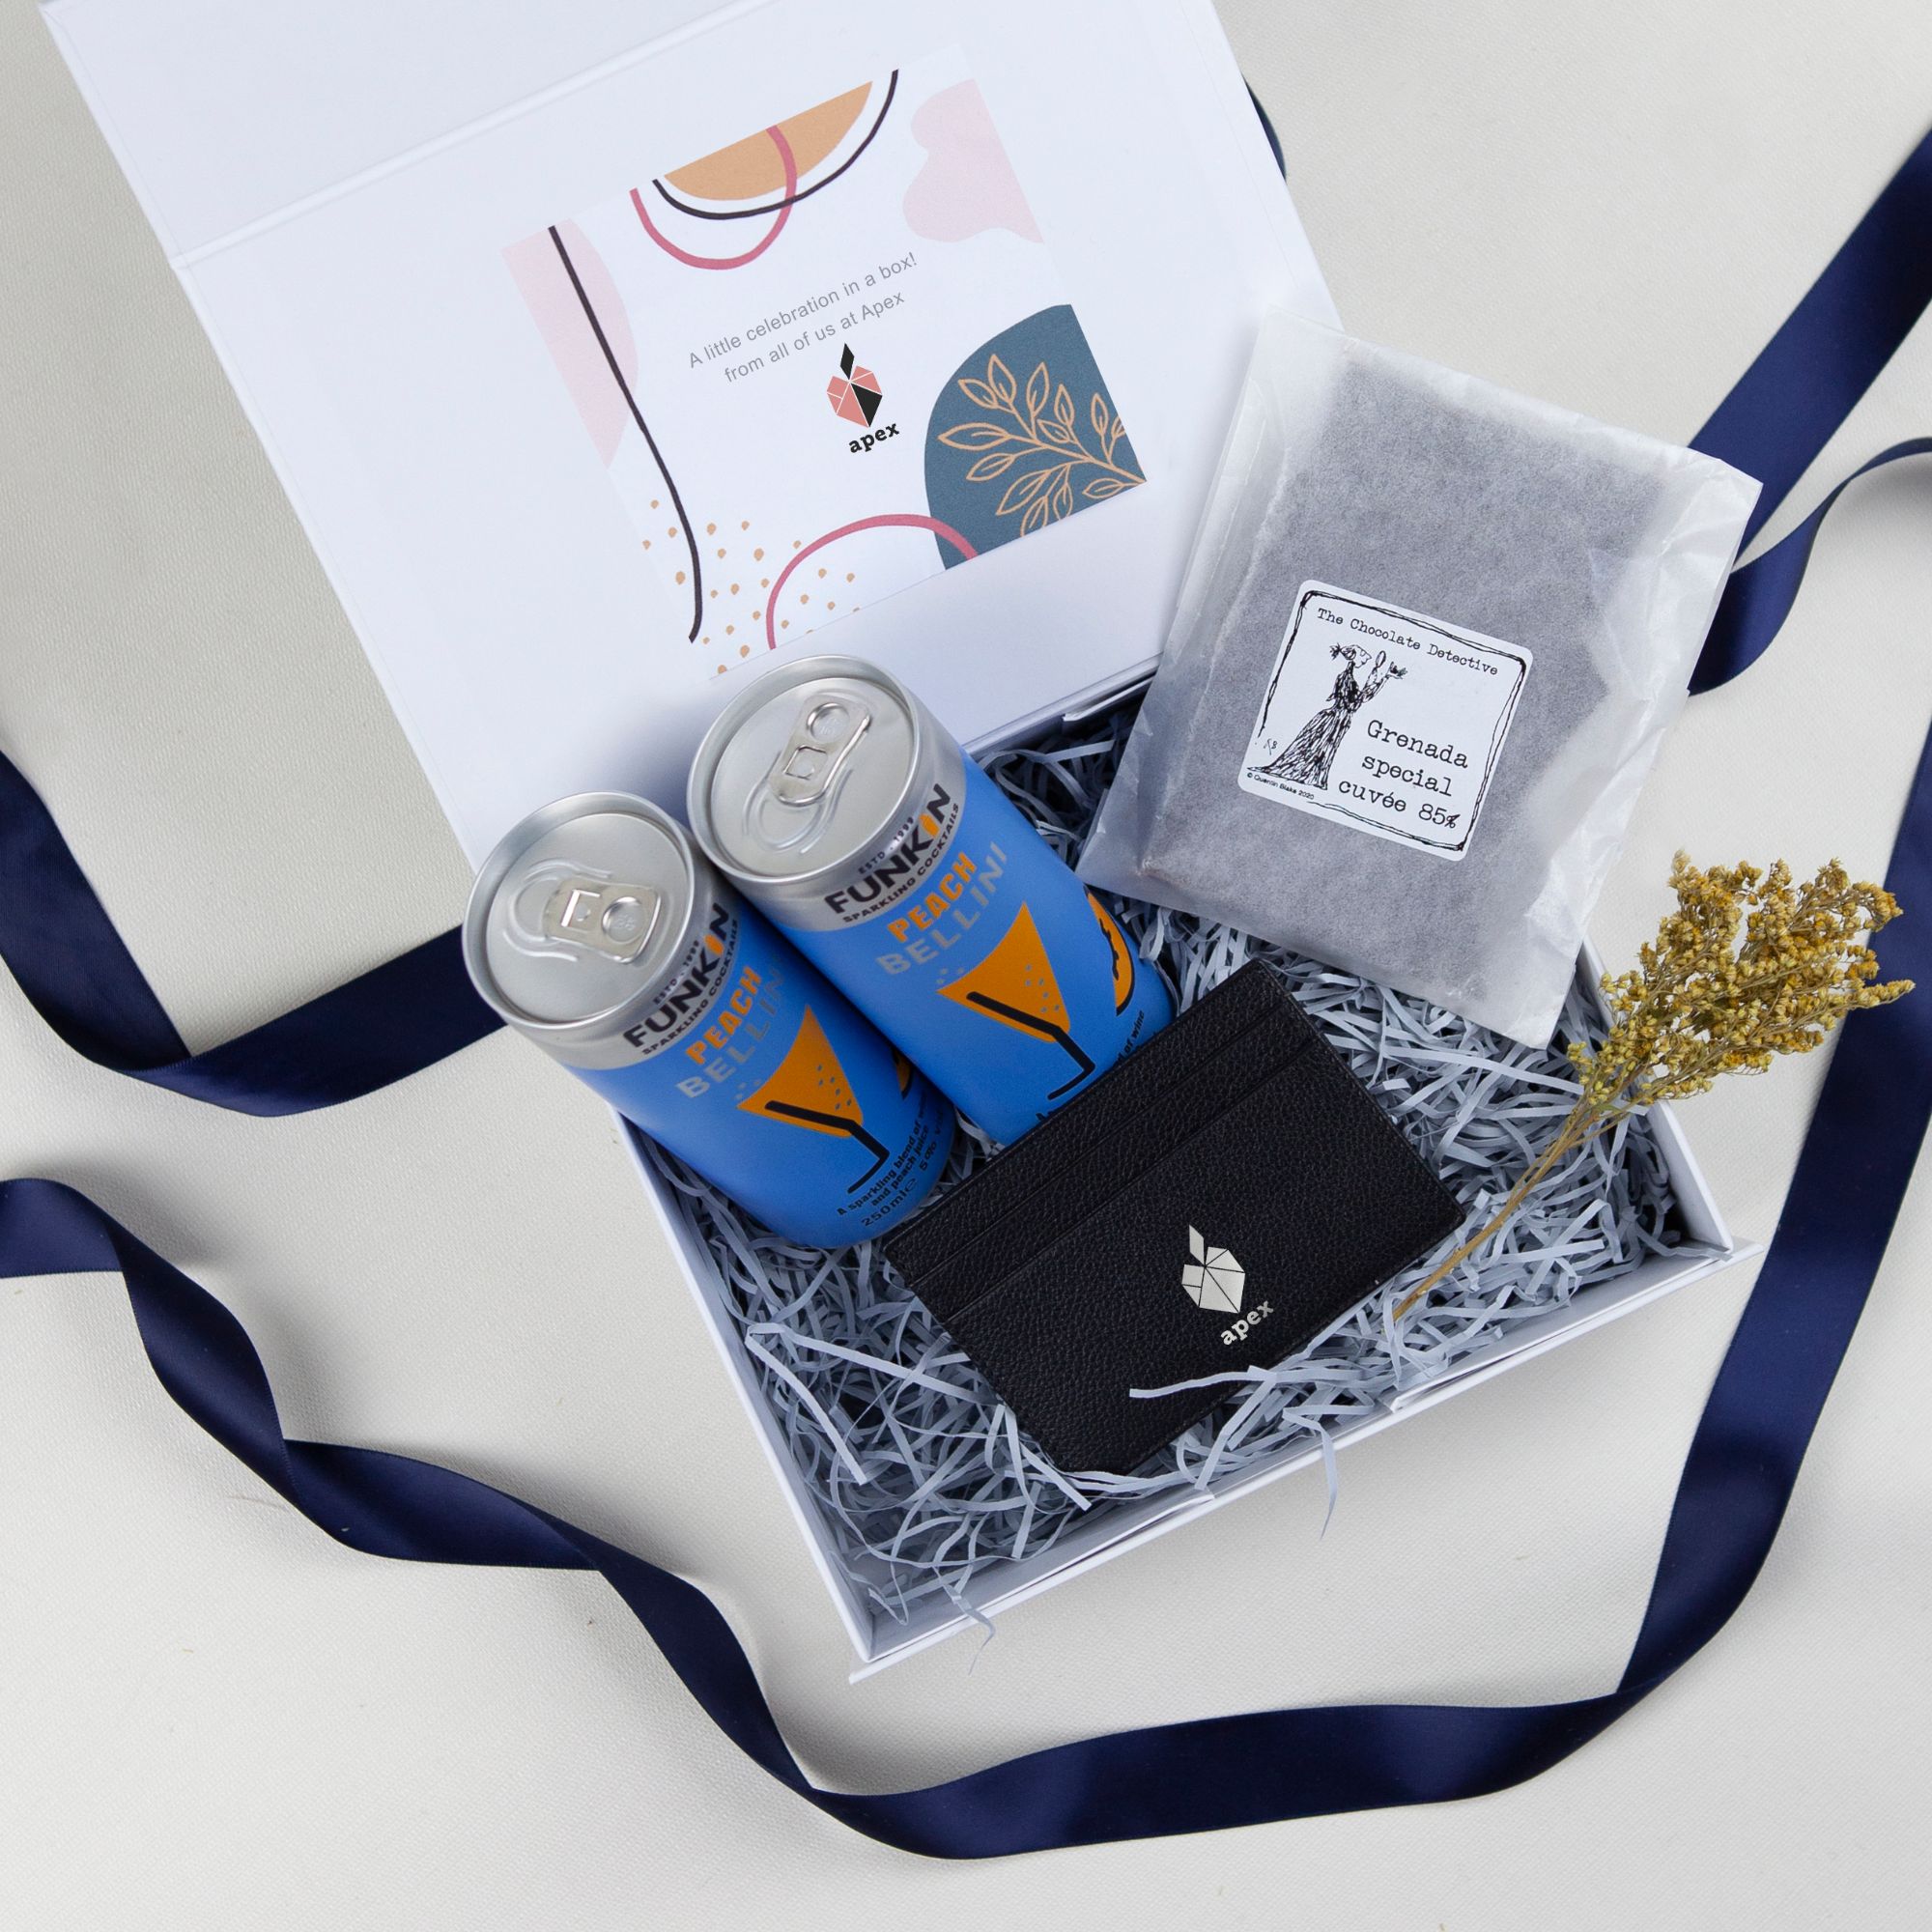 Celebration gift box with branded leather card case, chocolates and cocktails